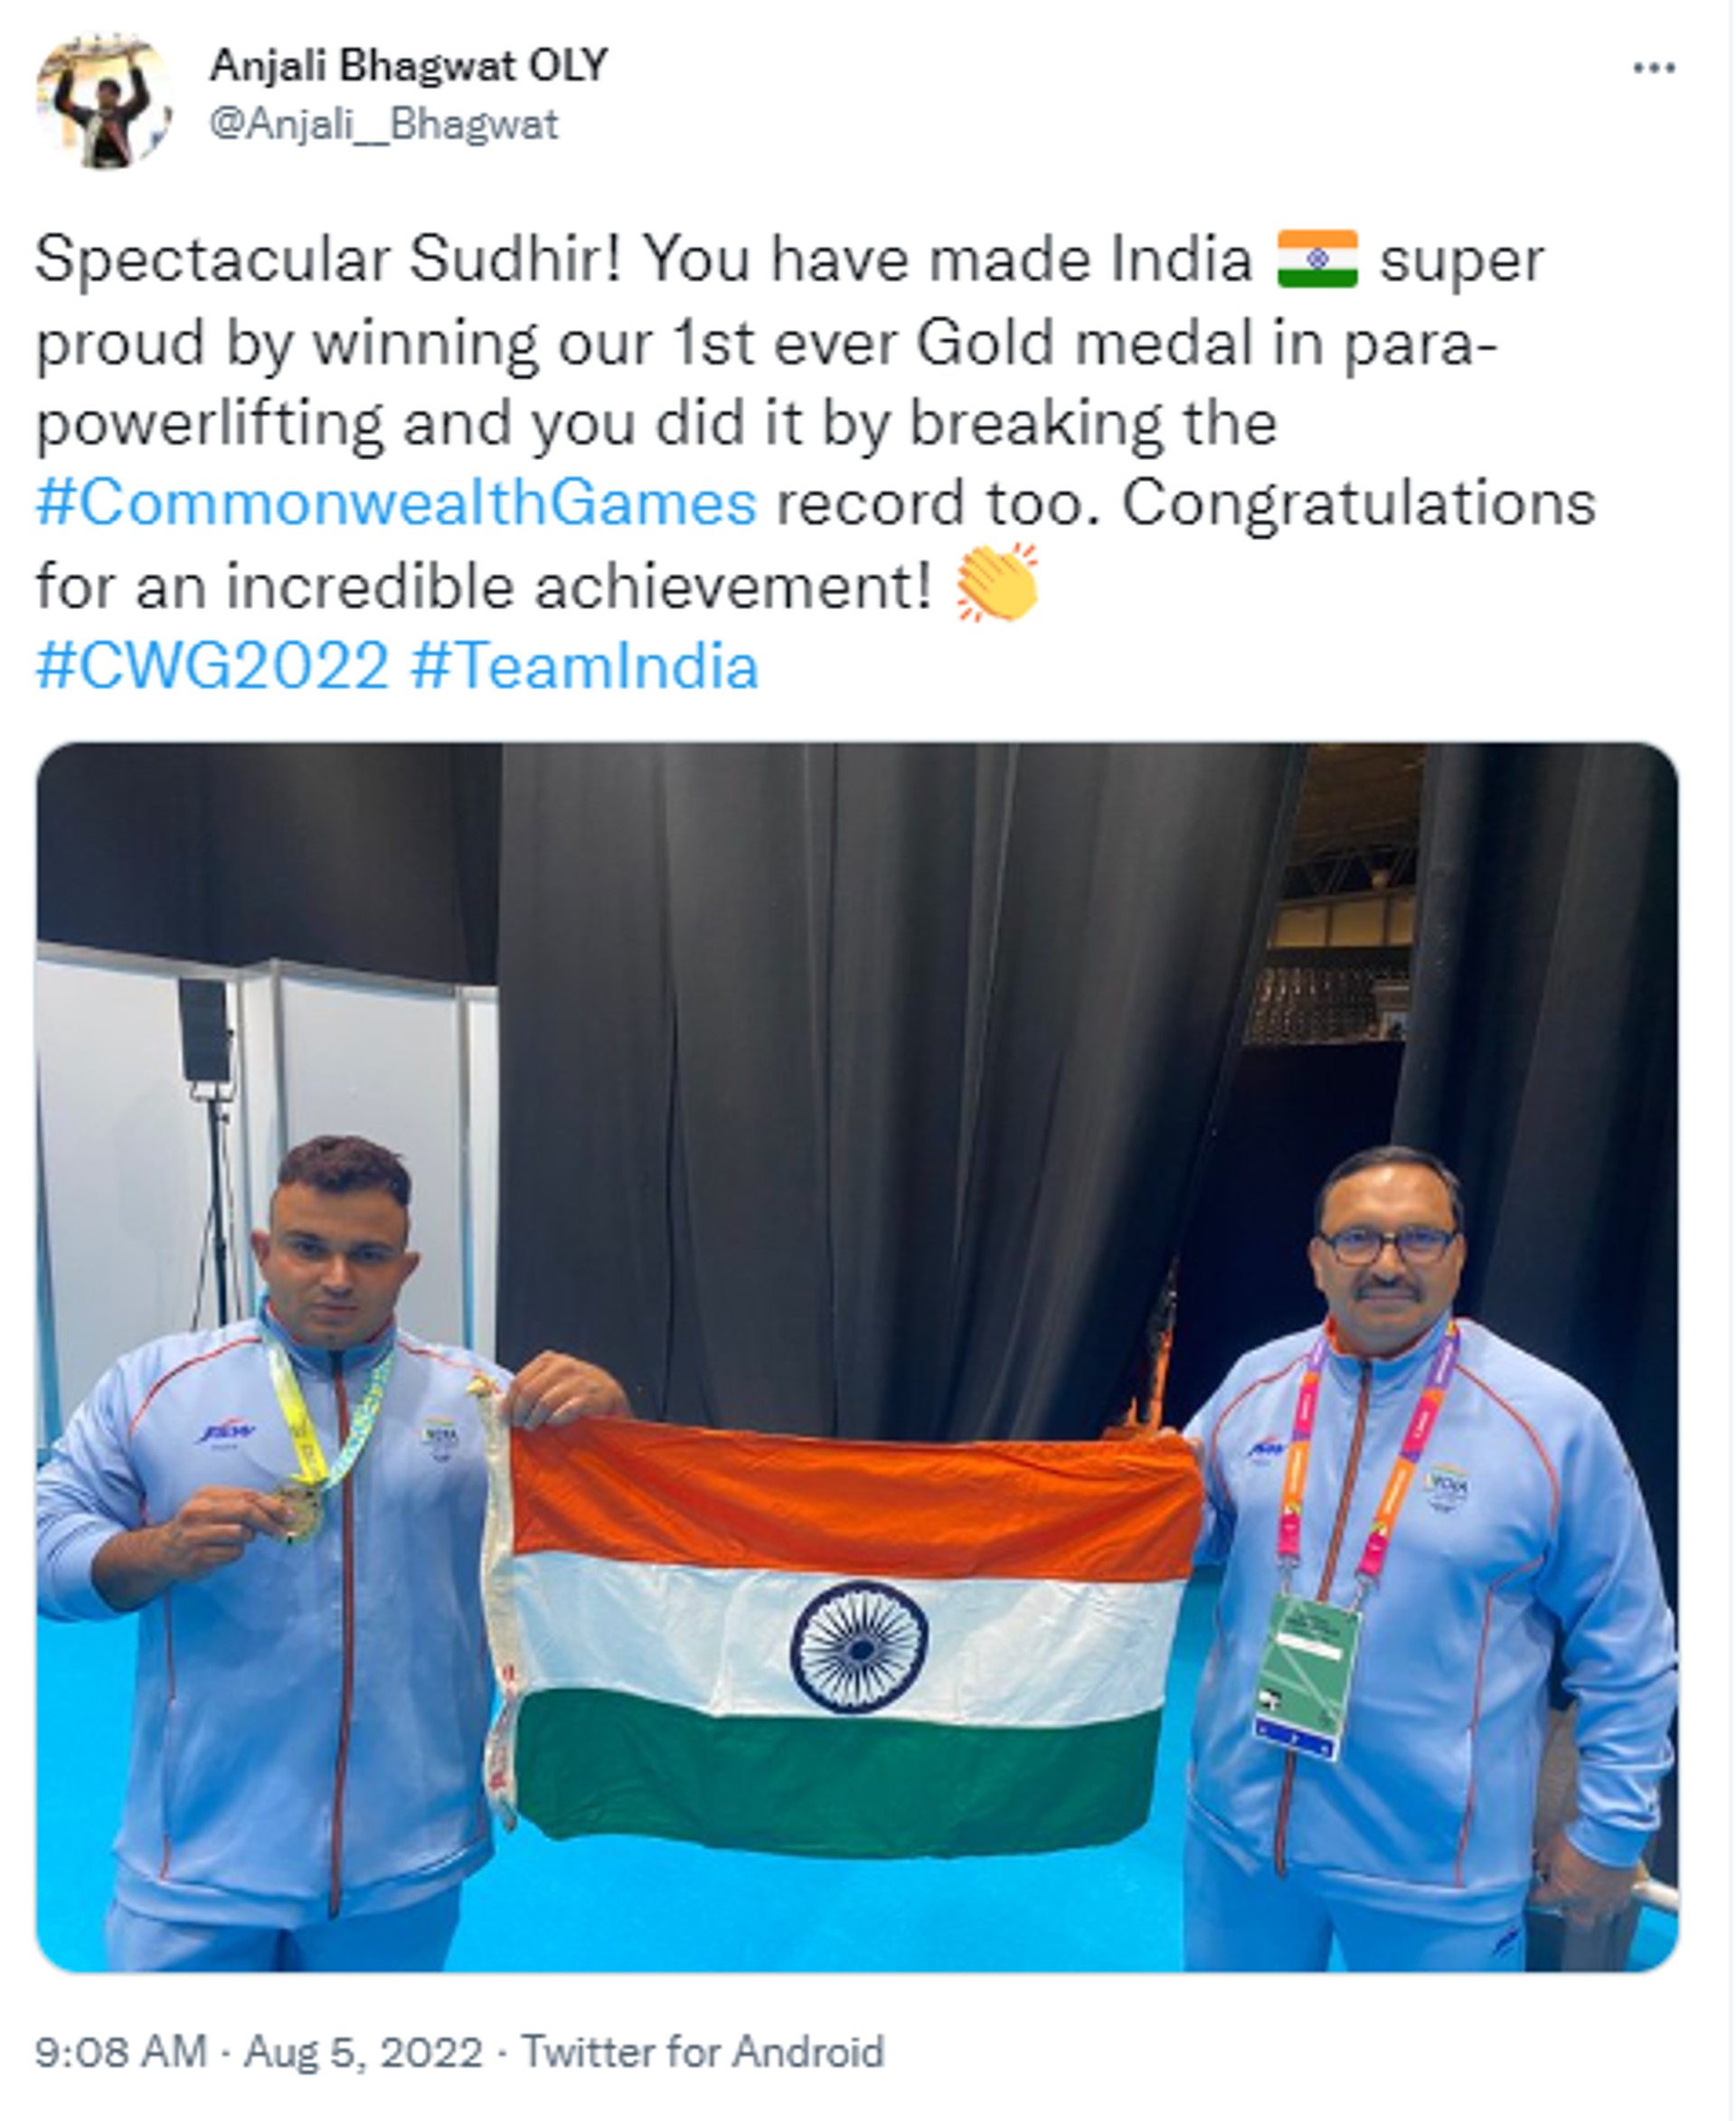 Olympian Anjali Bhagwat Congratulated Sudhir for Gold Medal at Commonwealth Games - Sputnik International, 1920, 05.08.2022